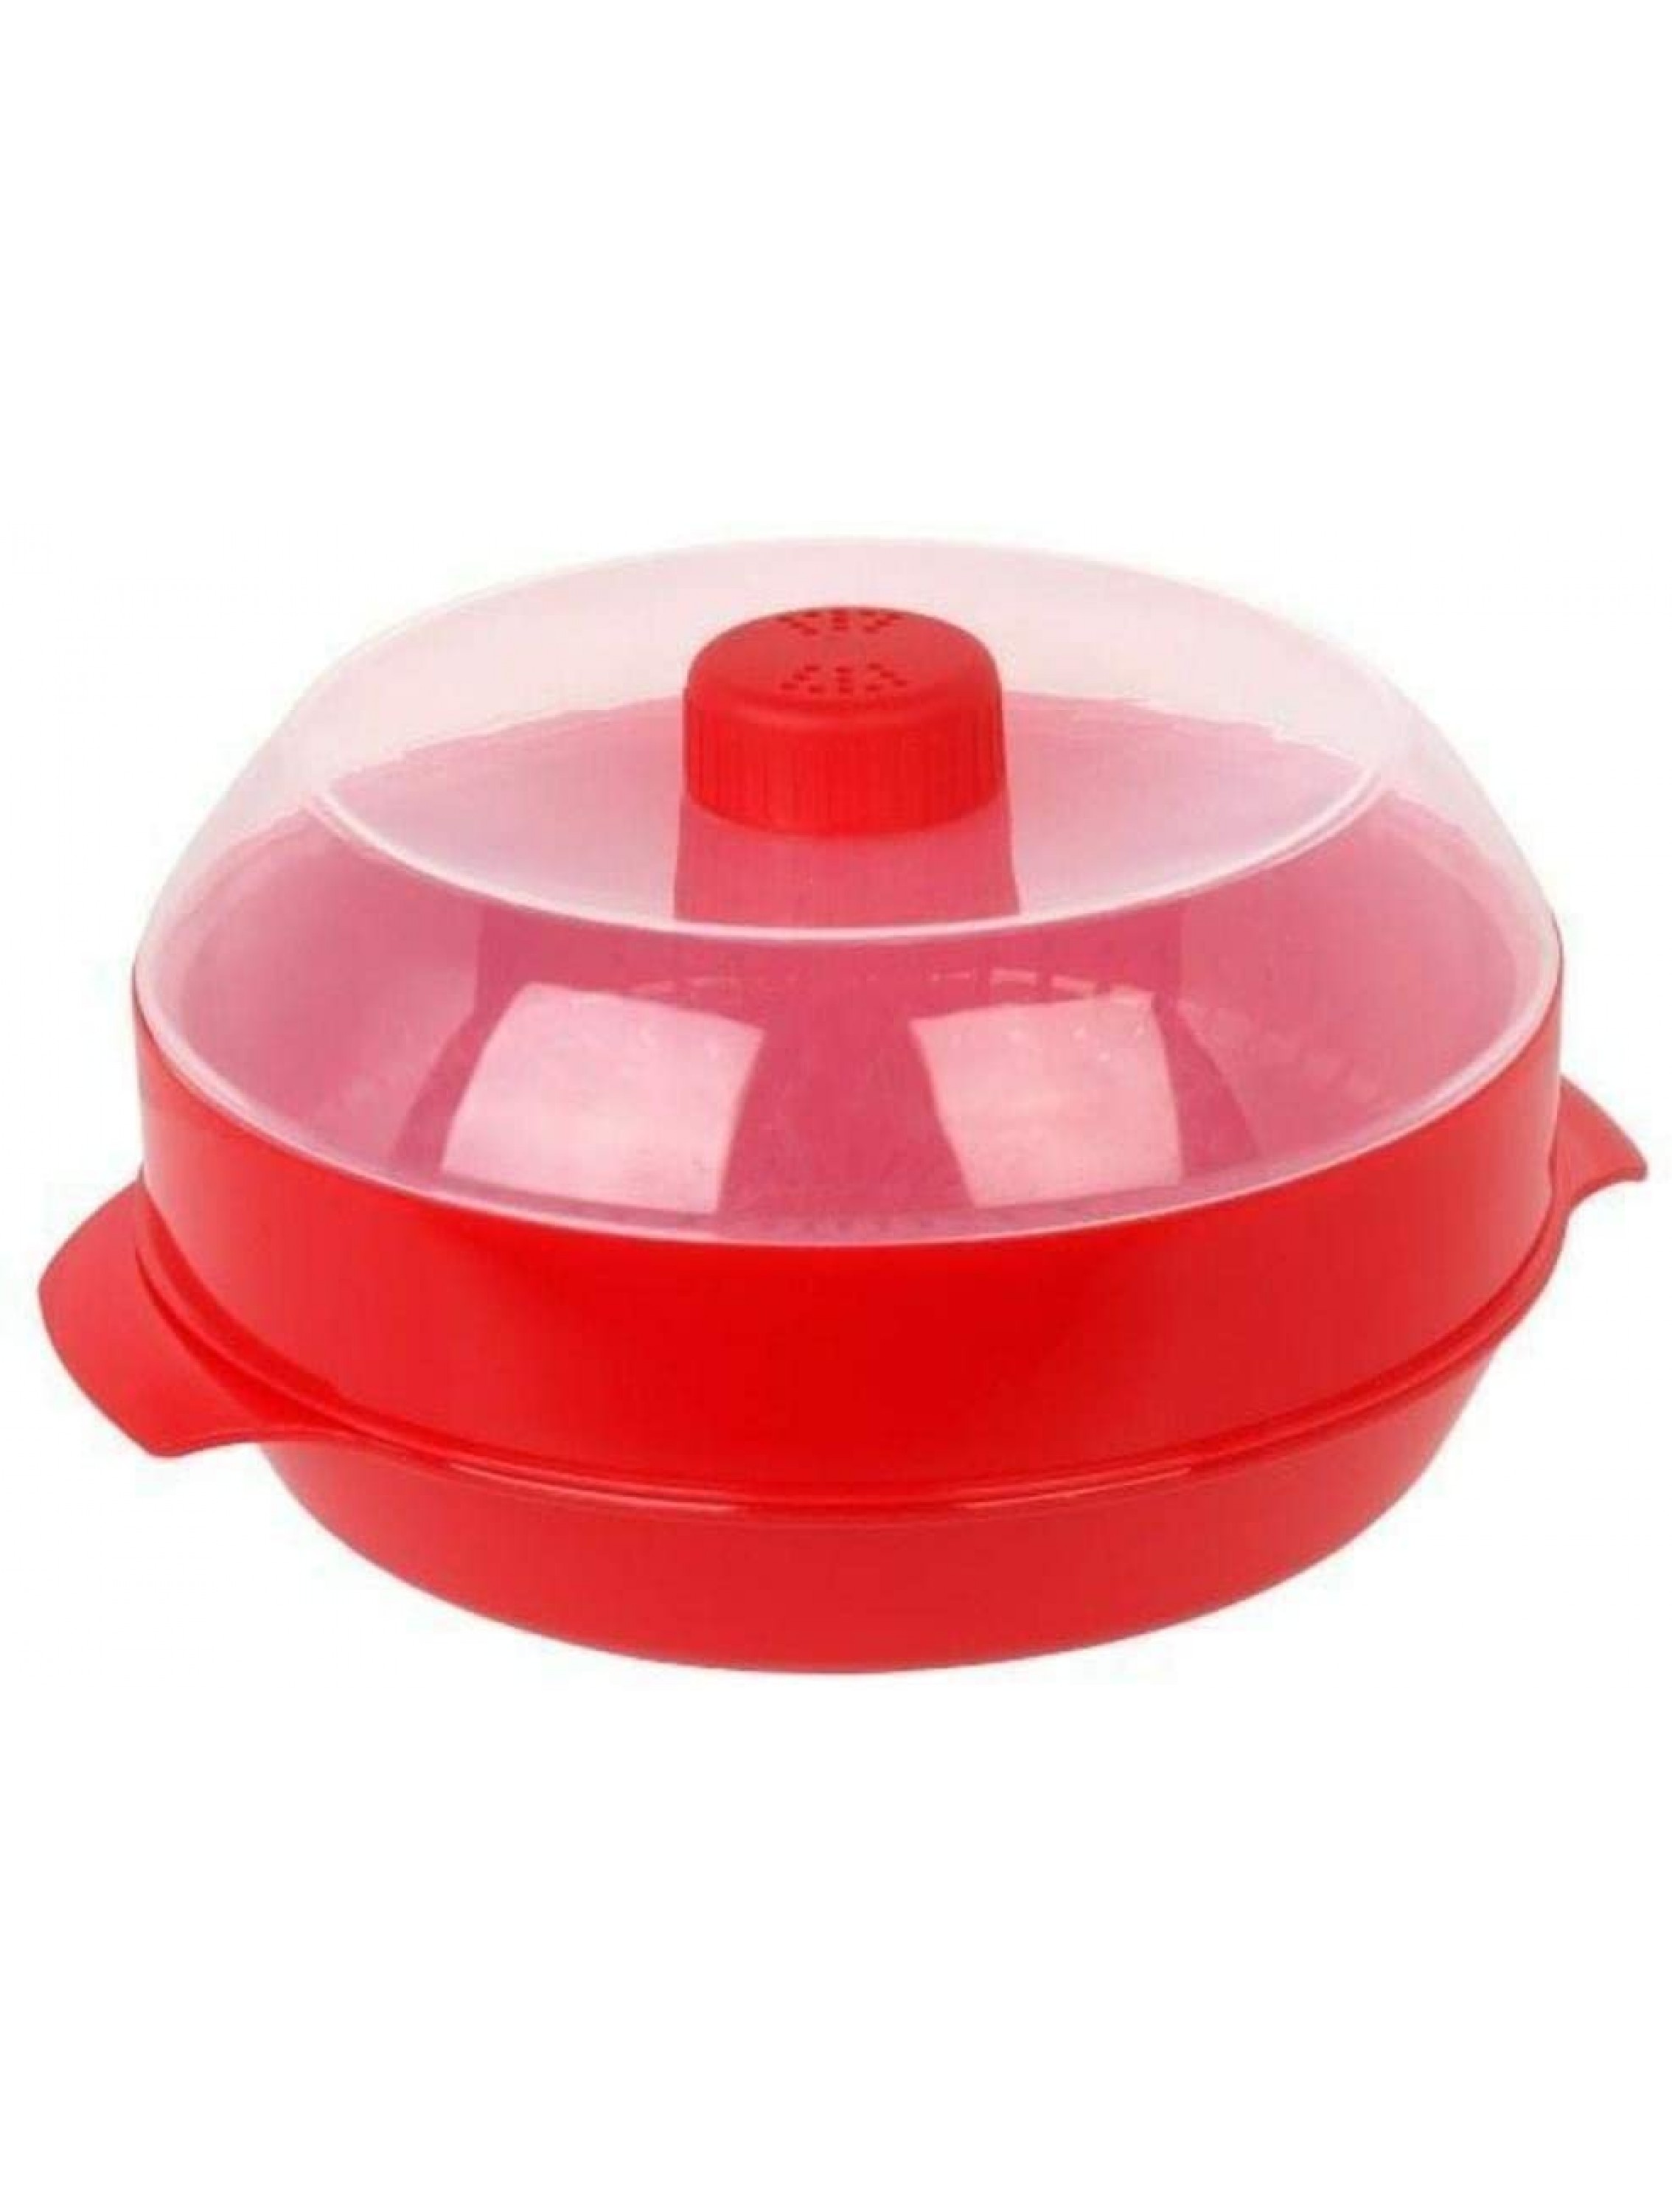 Microwave Steamer Multi-Purpose Use For Healthy Cooking Quick Fast Vegetables Meats Poultry or Fish Vented Knob -No Oil Needed! BPA FREE 42 oz. Capacity - BRCQX6TJM